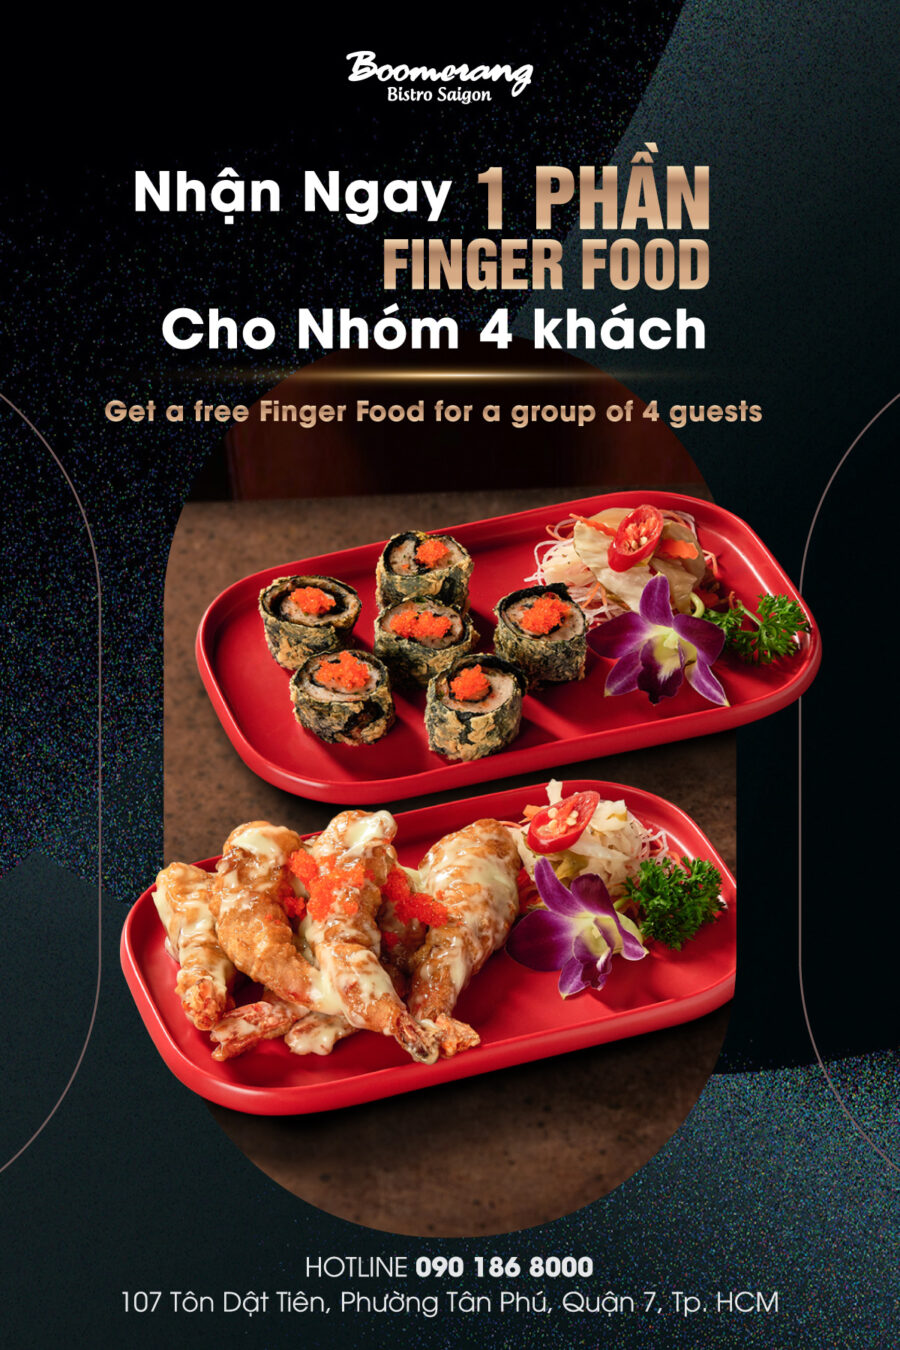 BOOMERANG OFFERS FREE FINGER FOOD FOR GROUP OF 4 [END]